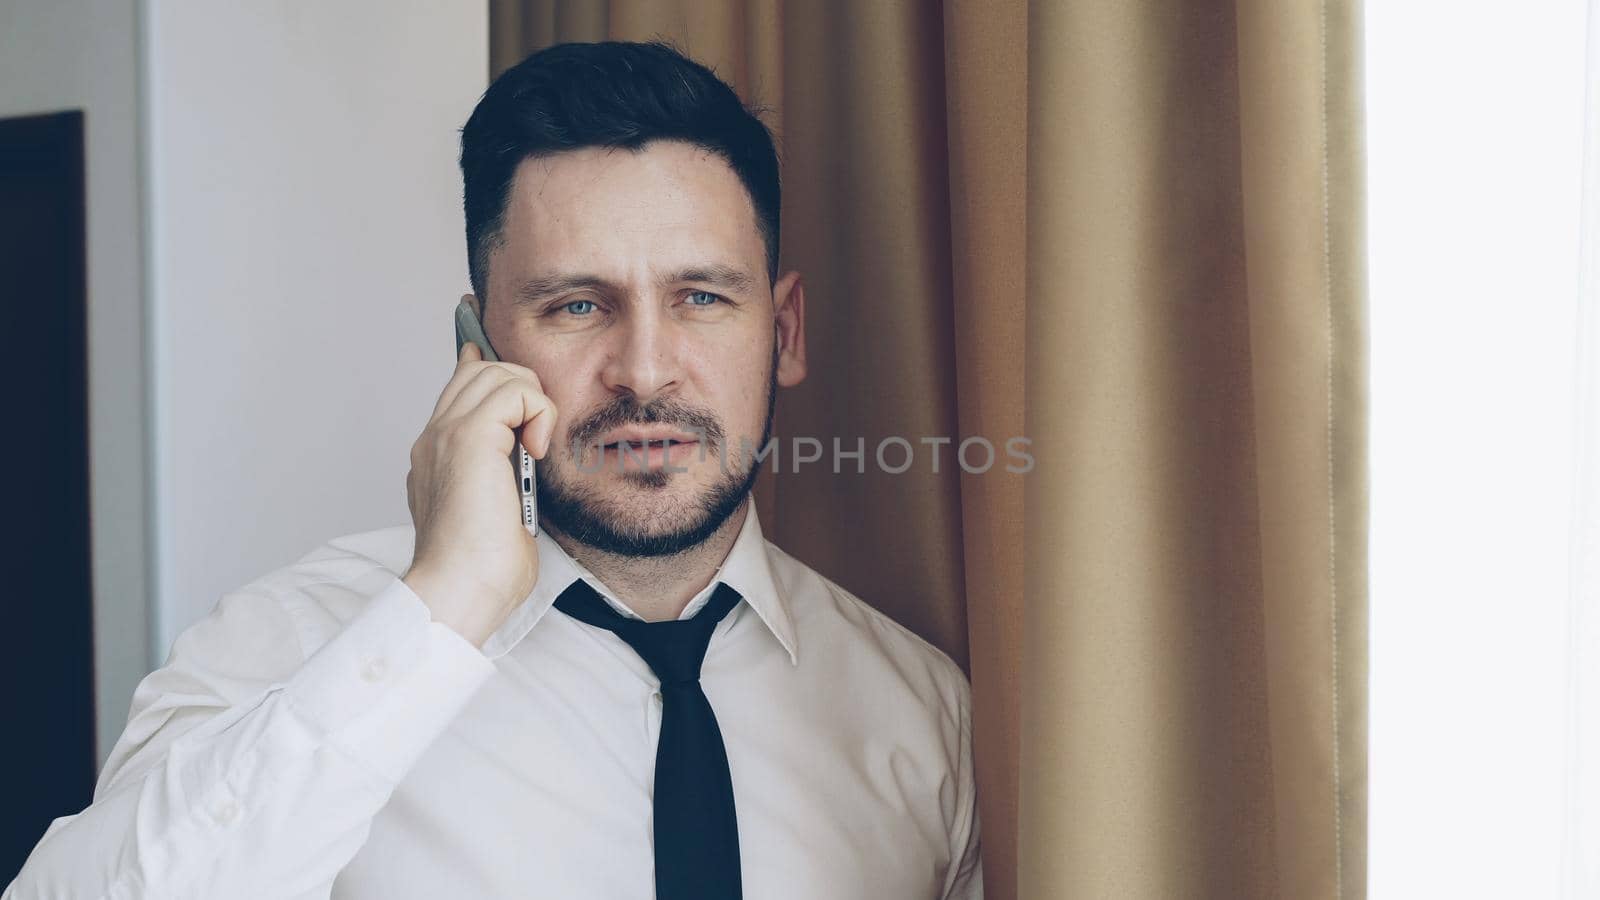 Adult bearded businessman in white shirt and tie talking on mobile phone standing near window in hotel room by silverkblack